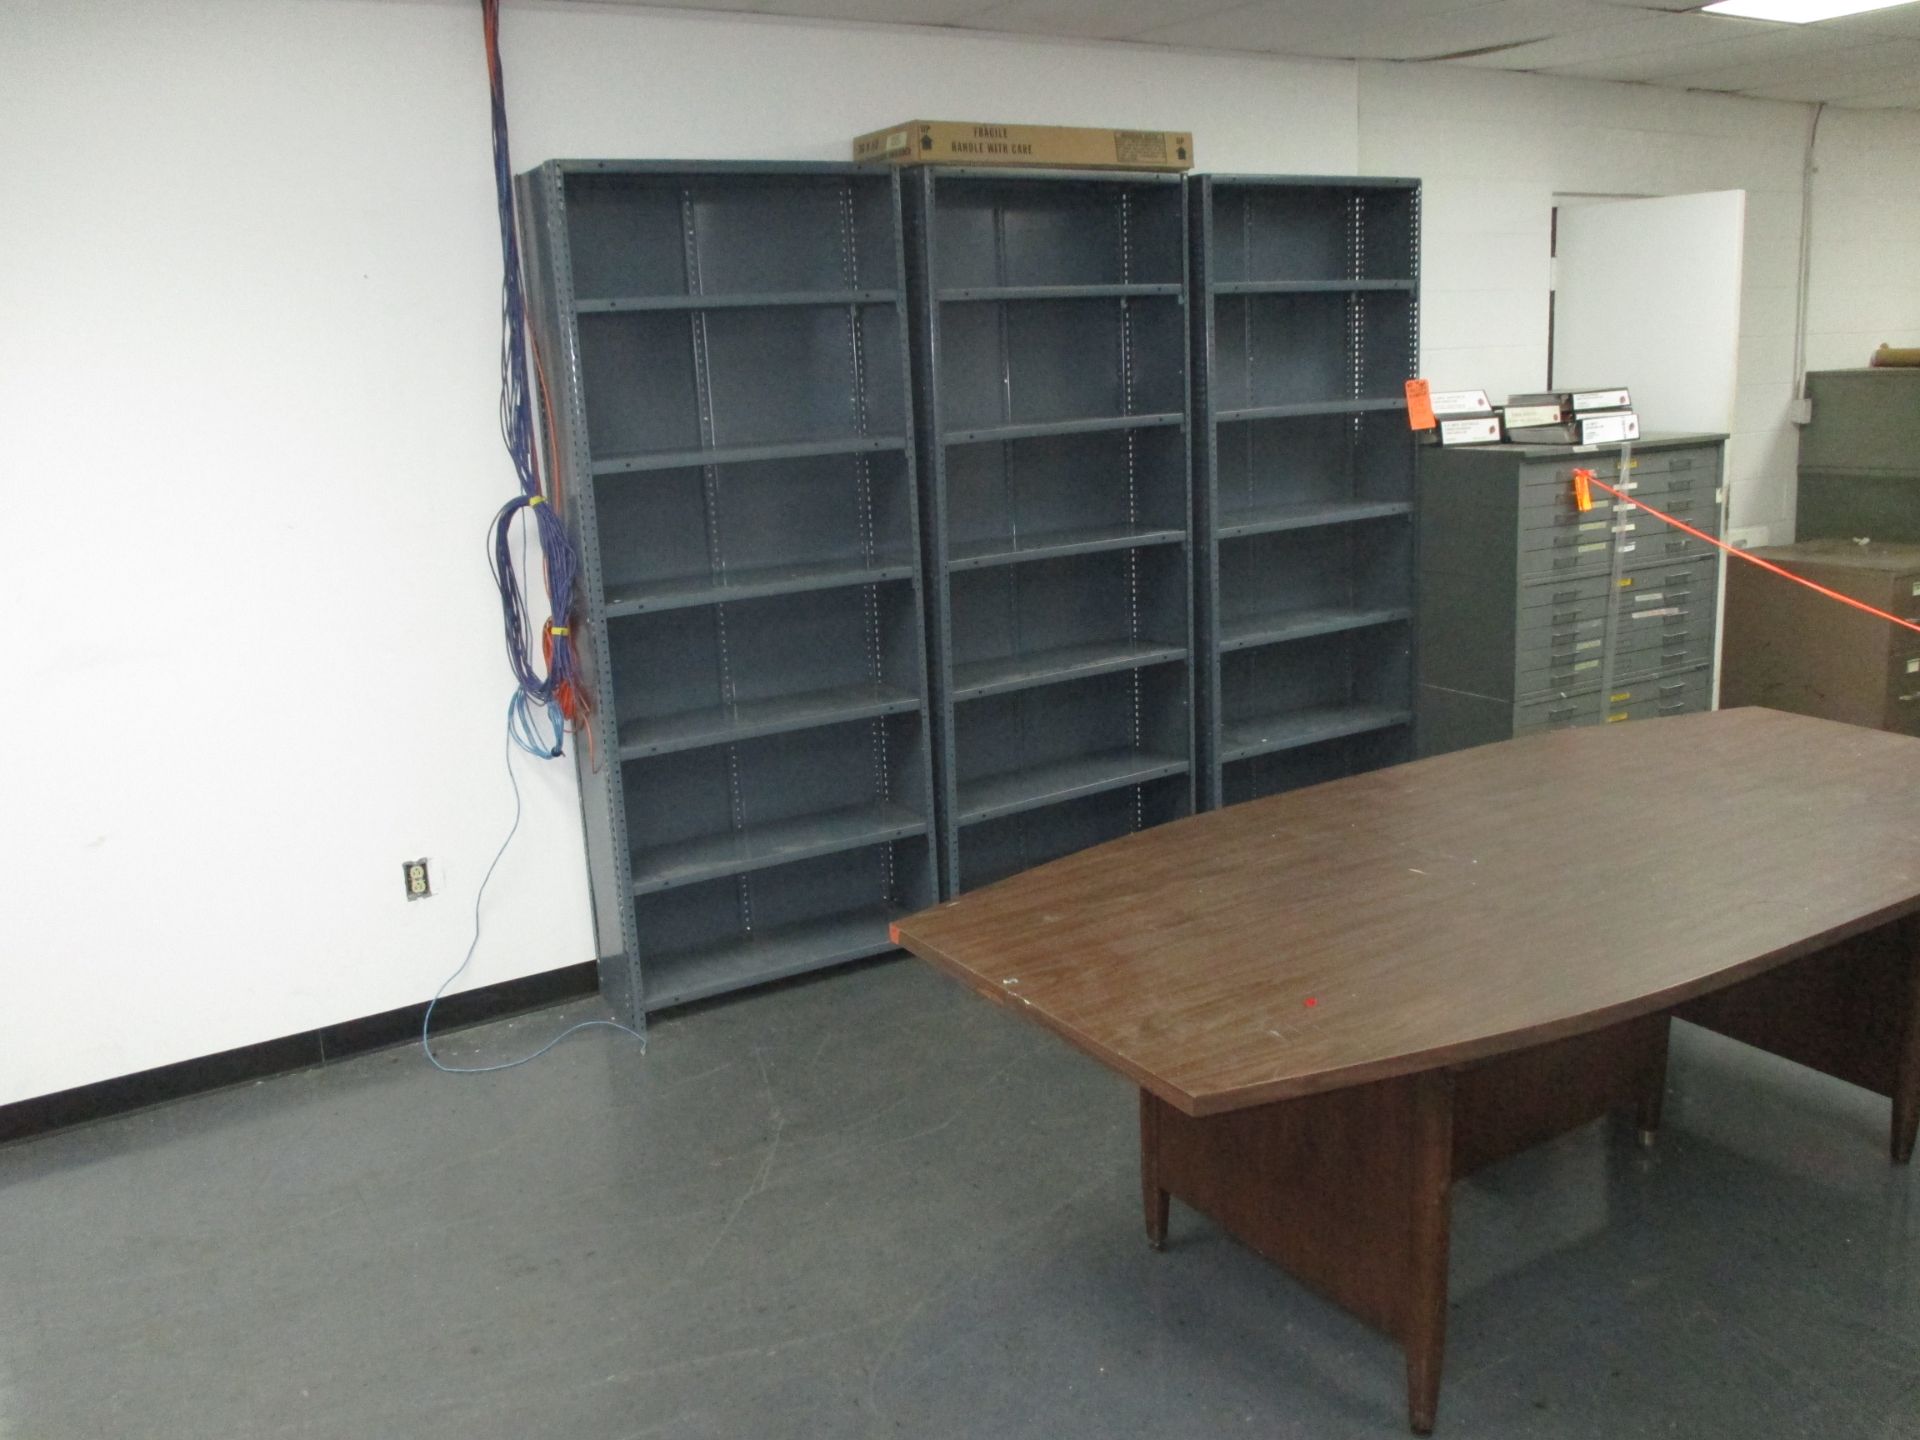 (3) SECTIONS OF PAN SHELVING & CONFERENCE TABLE